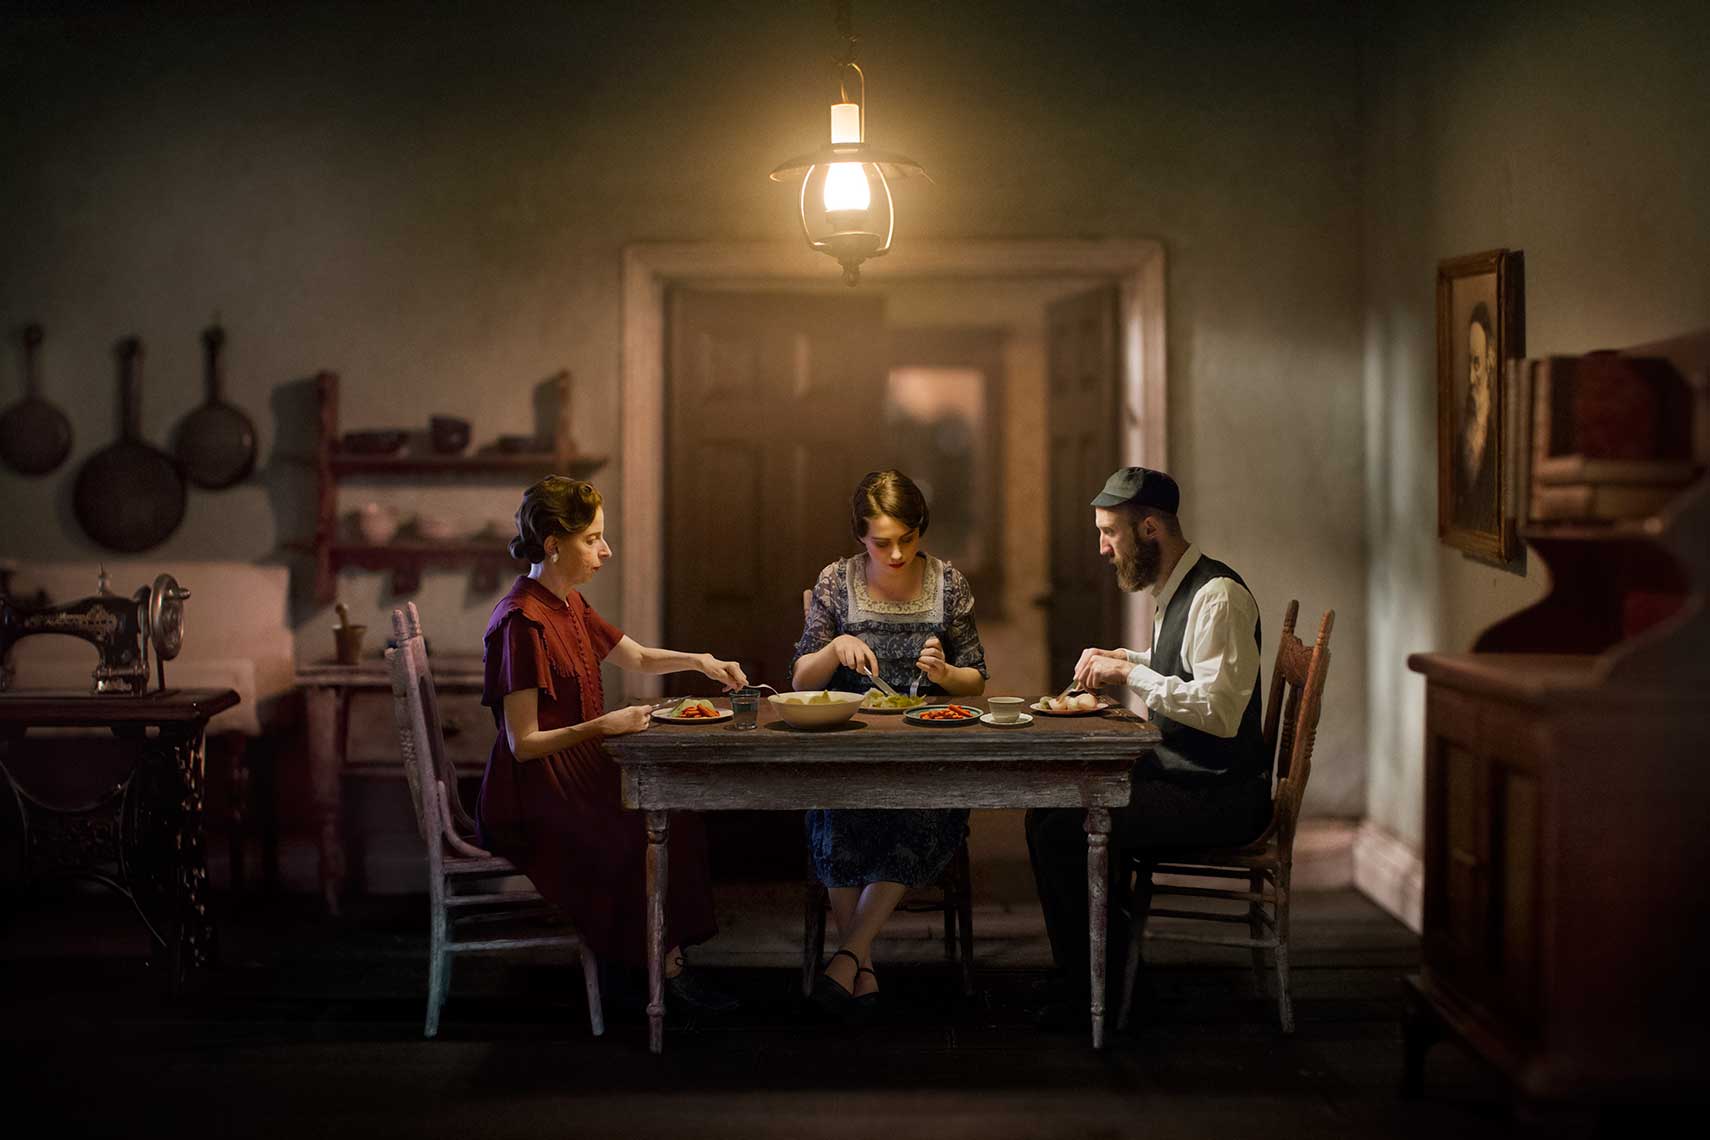 An homage to Van Gogh’s “The Potato Eaters”, a painterly photomontage of 1930s Eastern European Jewish family eating a humble meal of cabbage and potatoesl in 1930s’ apartment in the dim light of a kerosene lantern chandelier.